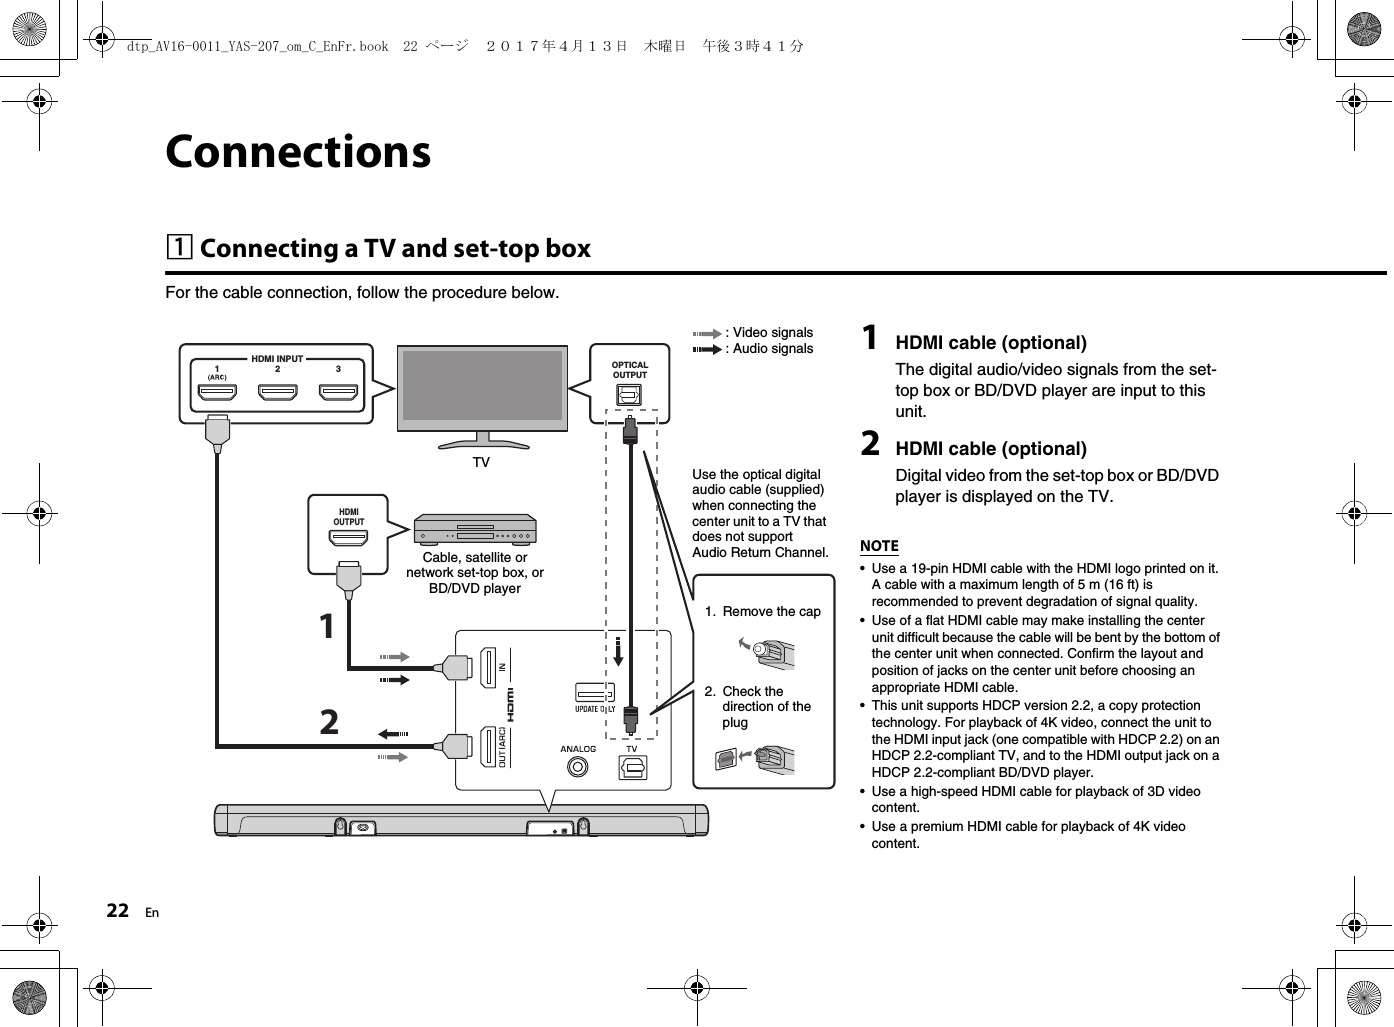 22 EnConnectionsa Connecting a TV and set-top boxFor the cable connection, follow the procedure below. OPTICALOUTPUT123HDMI INPUTHDMIOUTPUT121HDMI cable (optional)The digital audio/video signals from the set-top box or BD/DVD player are input to this unit.2HDMI cable (optional)Digital video from the set-top box or BD/DVD player is displayed on the TV.NOTE• Use a 19-pin HDMI cable with the HDMI logo printed on it. A cable with a maximum length of 5 m (16 ft) is recommended to prevent degradation of signal quality.• Use of a flat HDMI cable may make installing the center unit difficult because the cable will be bent by the bottom of the center unit when connected. Confirm the layout and position of jacks on the center unit before choosing an appropriate HDMI cable.• This unit supports HDCP version 2.2, a copy protection technology. For playback of 4K video, connect the unit to the HDMI input jack (one compatible with HDCP 2.2) on an HDCP 2.2-compliant TV, and to the HDMI output jack on a HDCP 2.2-compliant BD/DVD player.• Use a high-speed HDMI cable for playback of 3D video content.• Use a premium HDMI cable for playback of 4K video content.Cable, satellite or network set-top box, or BD/DVD playerTV1. Remove the cap2. Check the direction of the plug: Video signals: Audio signalsUse the optical digital audio cable (supplied) when connecting the center unit to a TV that does not support Audio Return Channel.dtp_AV16-0011_YAS-207_om_C_EnFr.book  22 ページ  ２０１７年４月１３日　木曜日　午後３時４１分